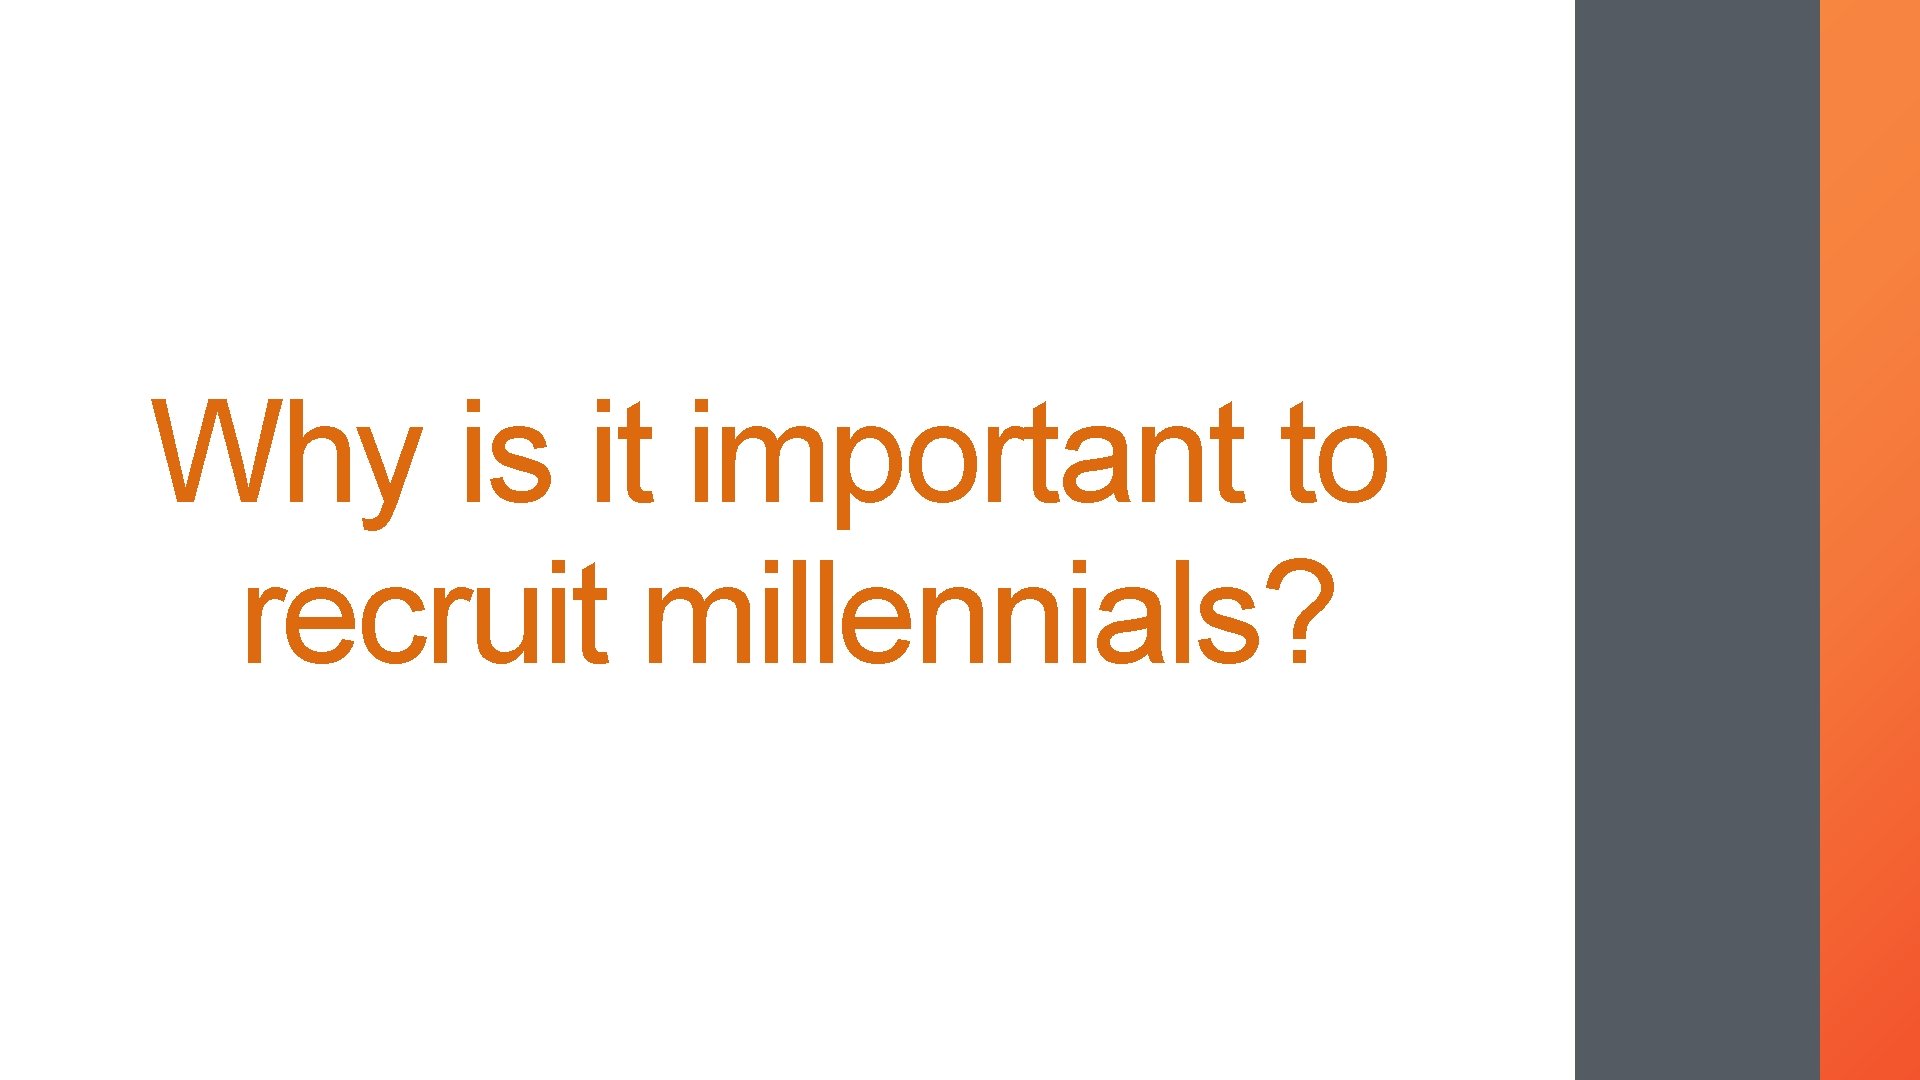 Why is it important to recruit millennials? 